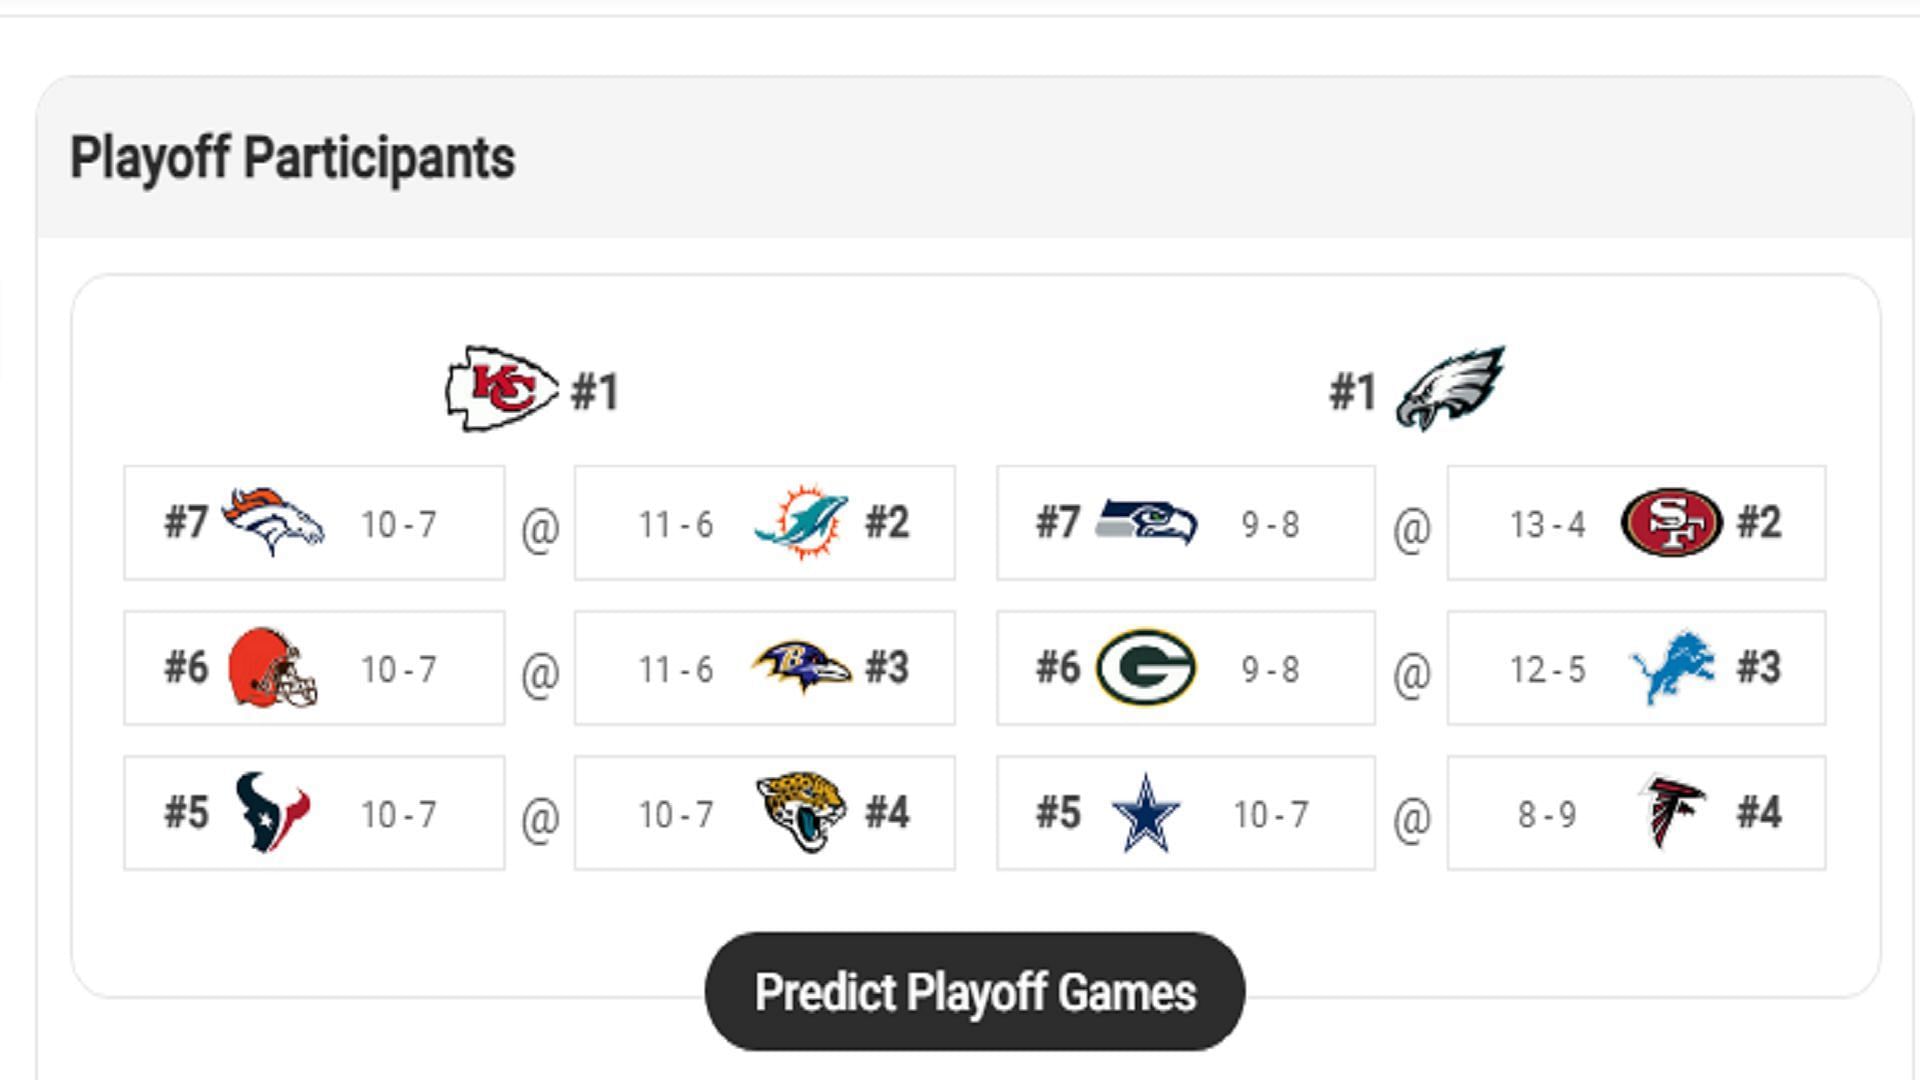 Packers reach playoffs to face Lions, per Pro Football Network&#039;s Playoff Predictor